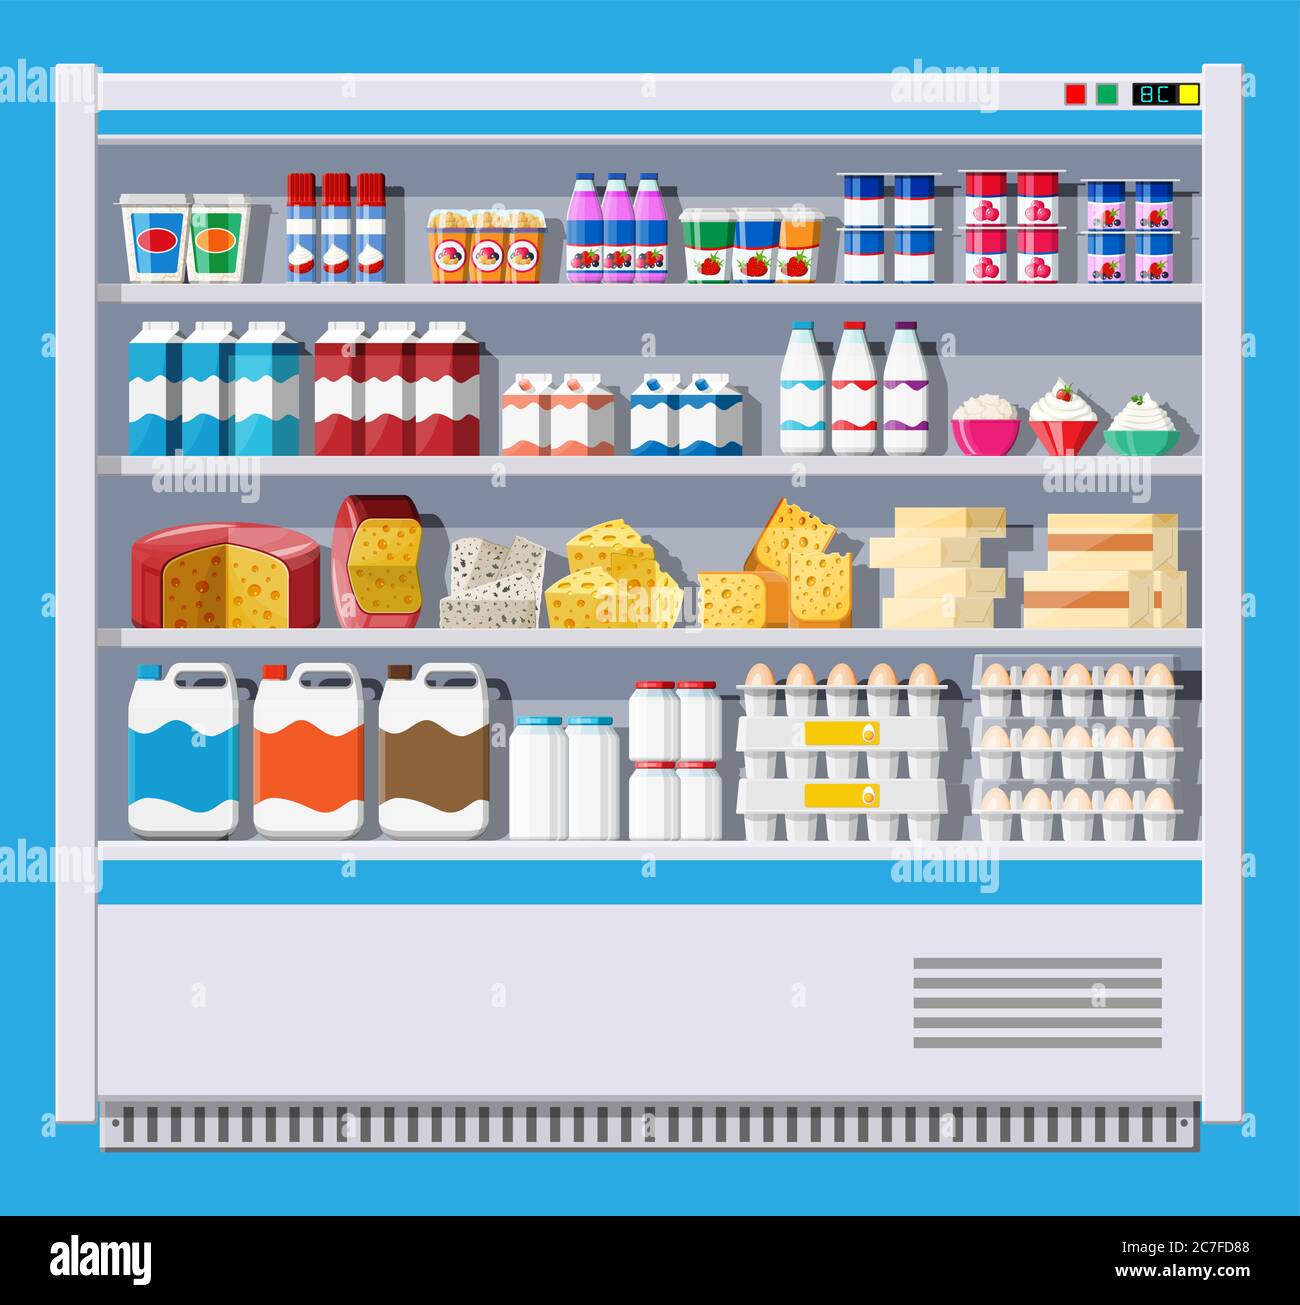 Showcase fridge for cooling dairy products. Different colored bottles and boxes in fridge. Refrigerator dispenser cooling machine. Milk, yogurt, sour cream, cheese, eggs. Flat vector illustration Stock Vector